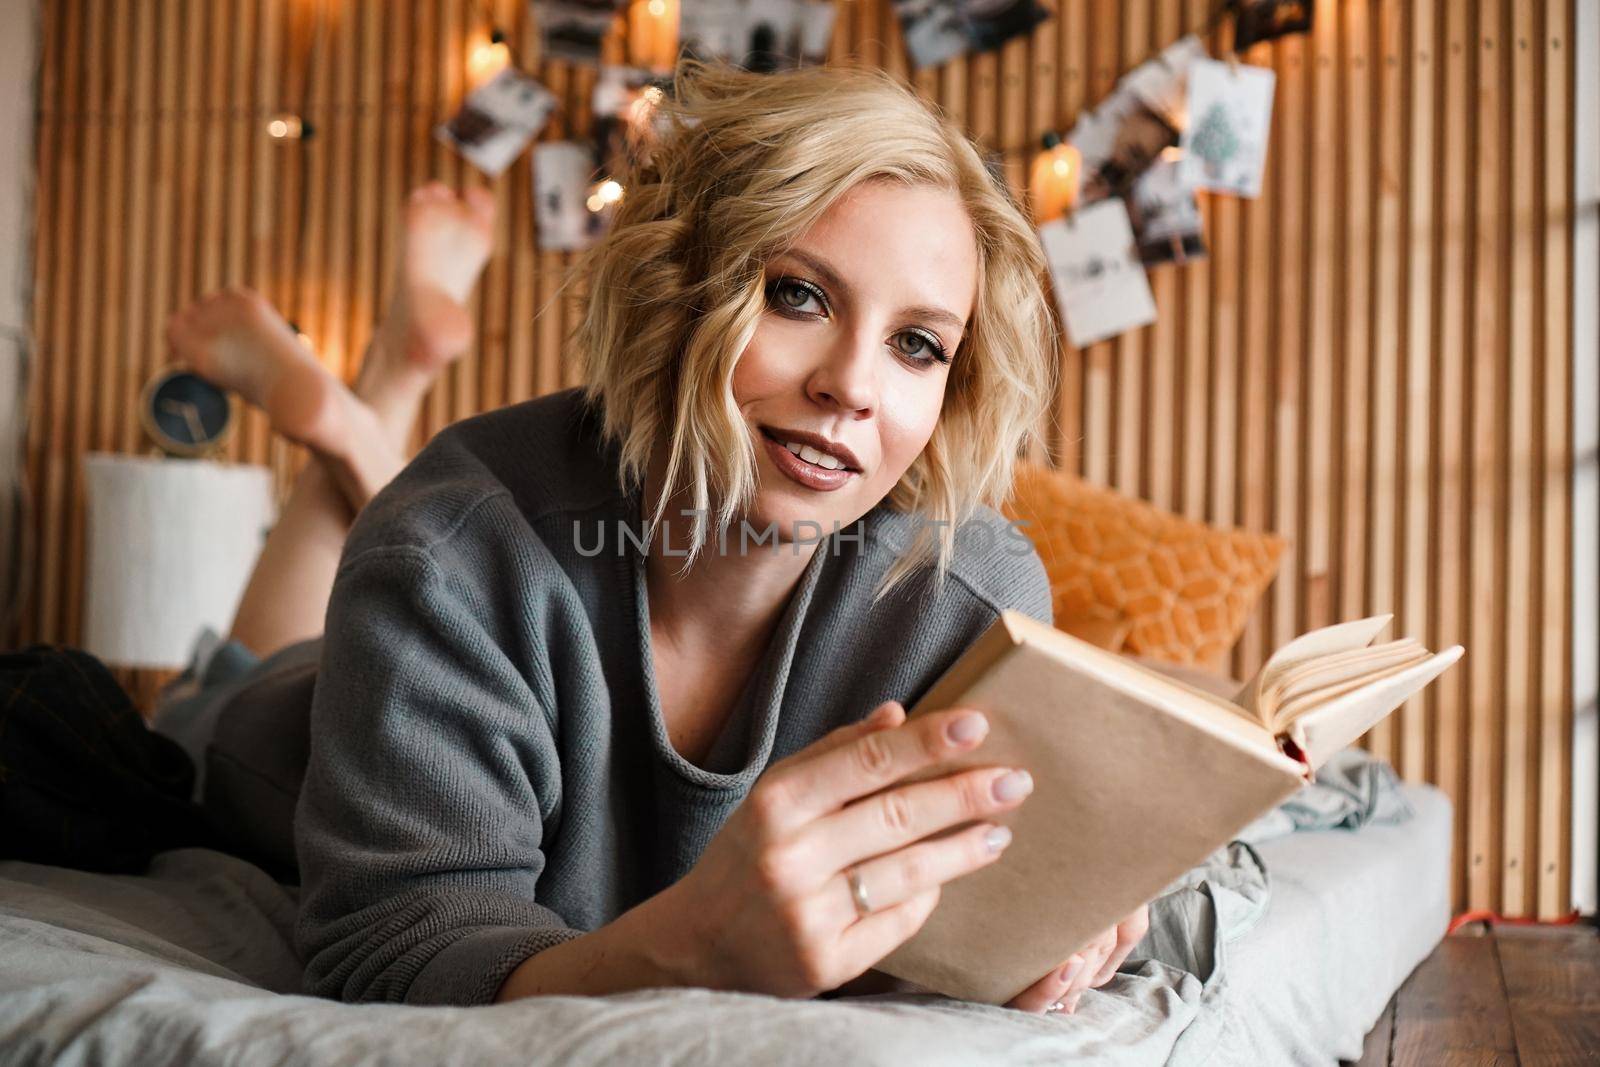 Happy Woman looking to the camera, relaxing and reading book on cozy bed - Wooden wall and photos with lights - blurred background